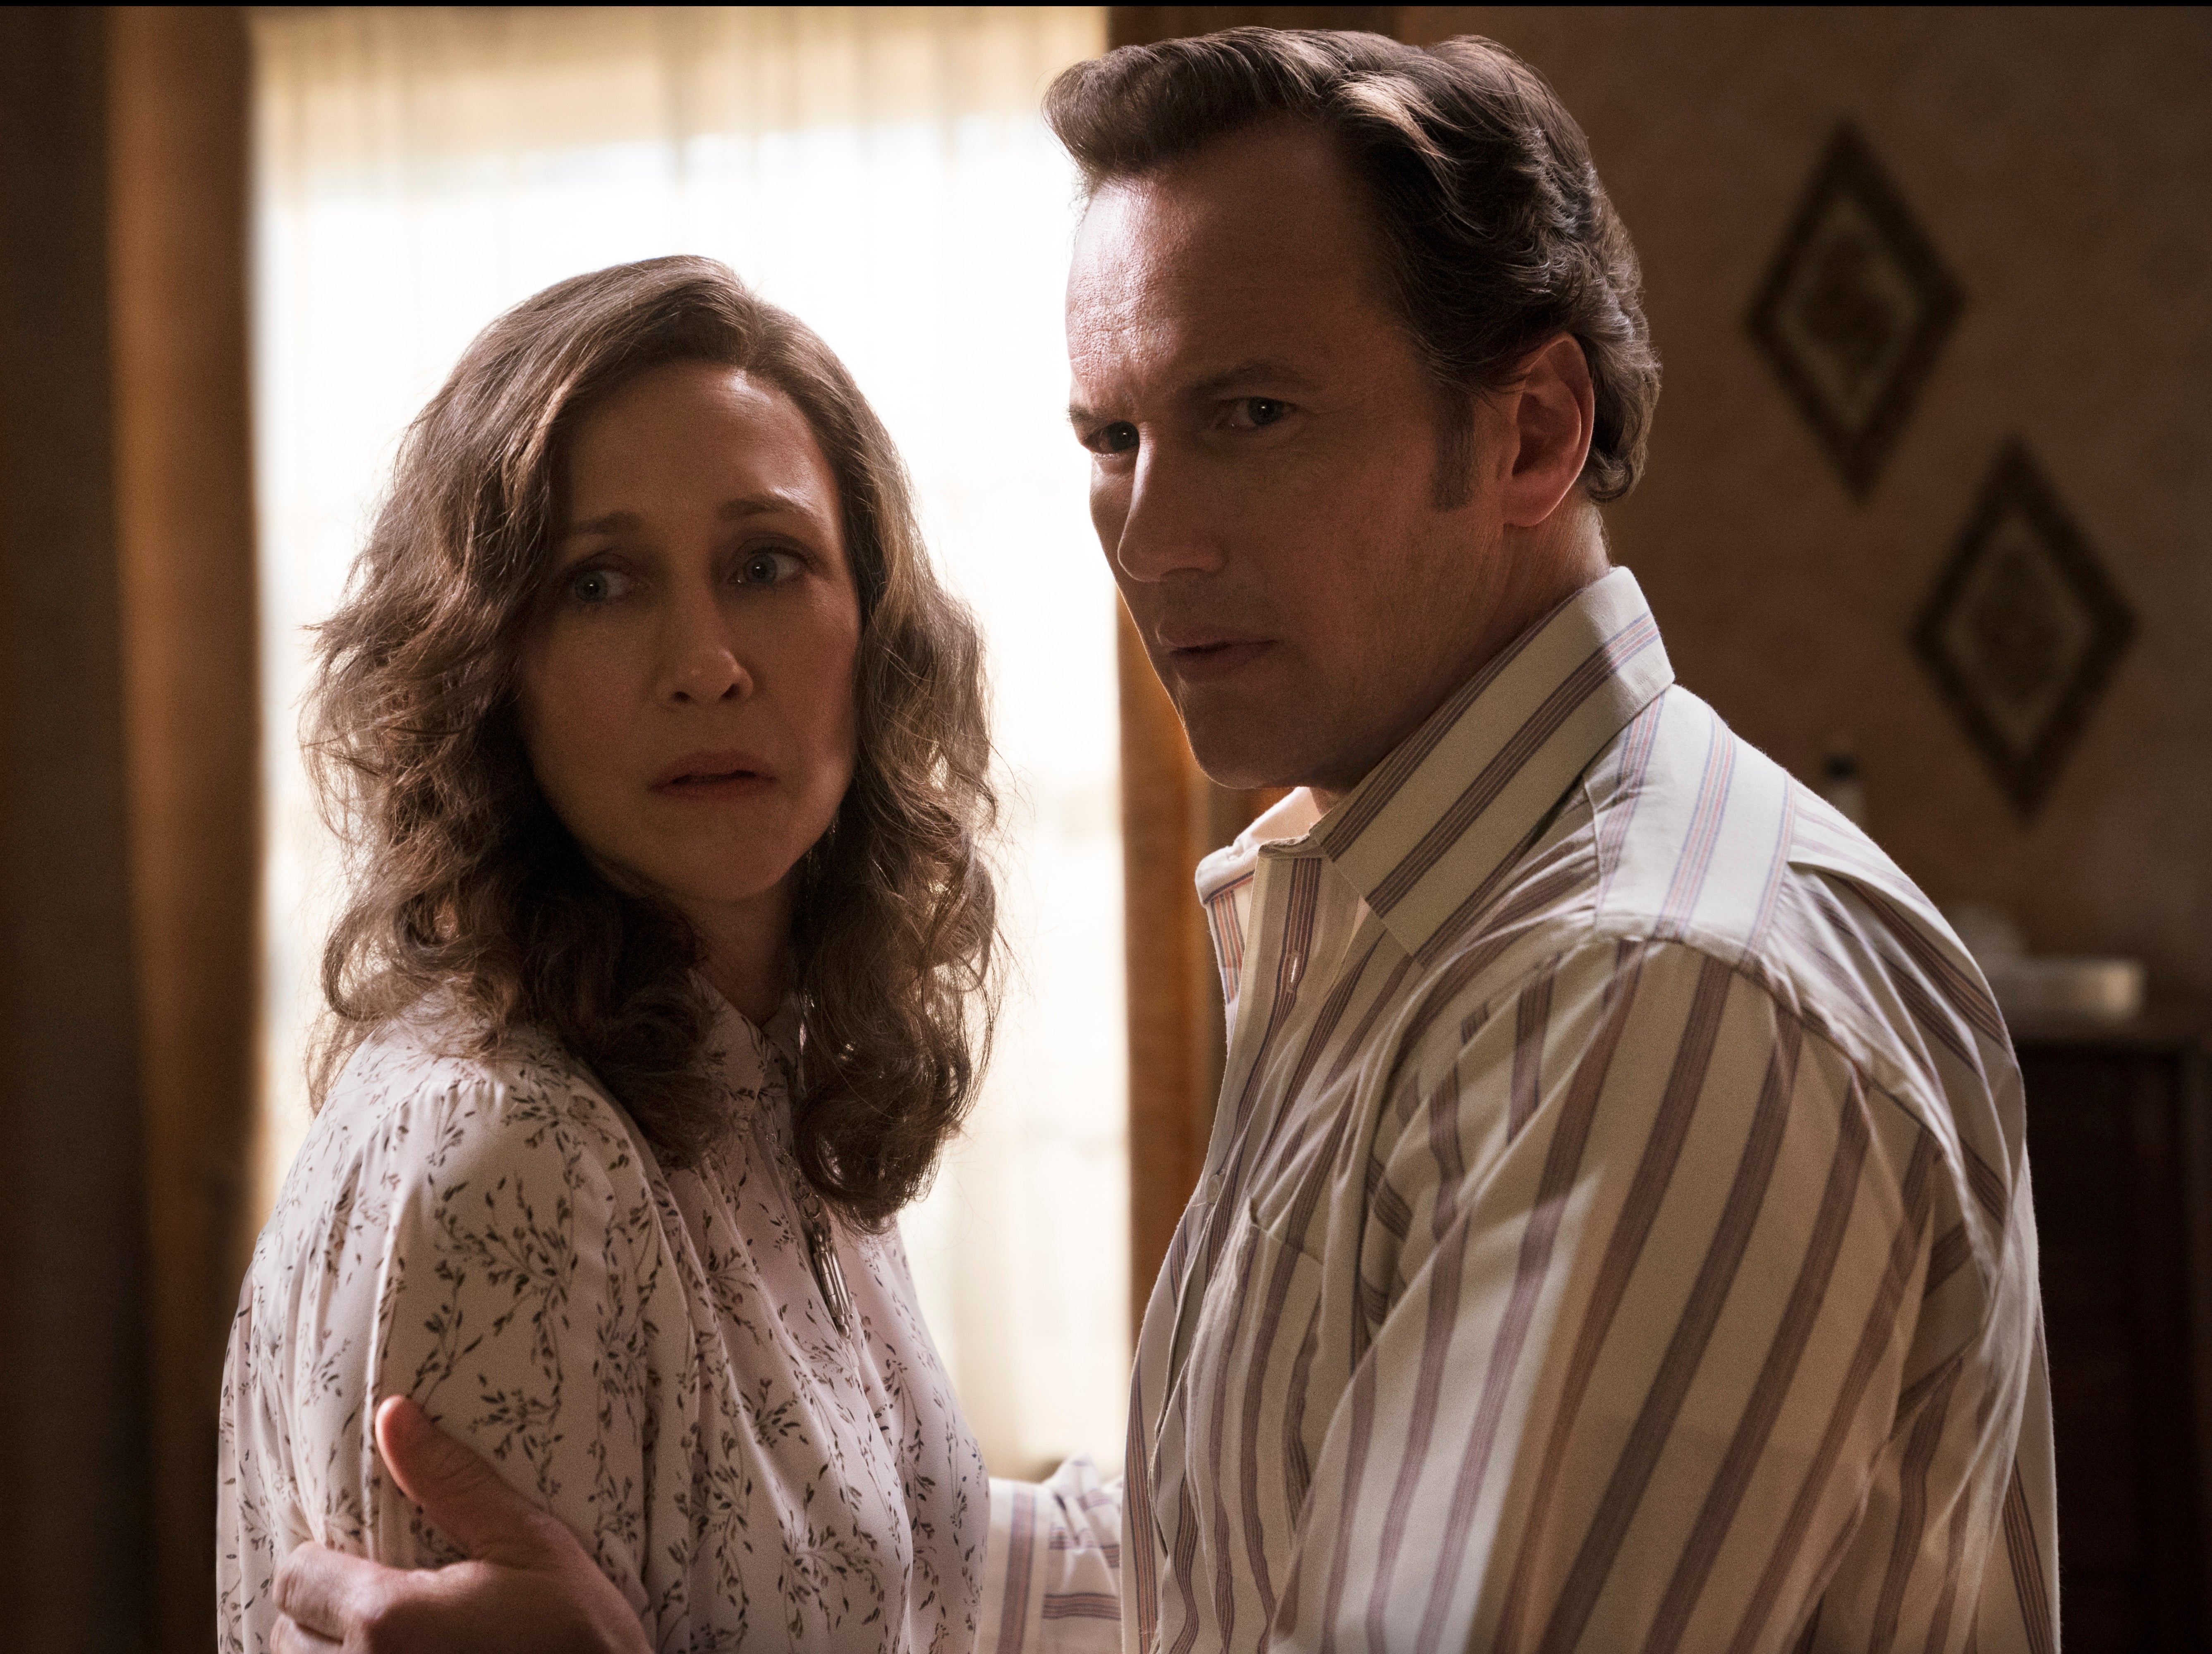 Paranormal investigators Ed and Lorraine Warren, played by Patrick Wilson and Vera Farmiga, were also married